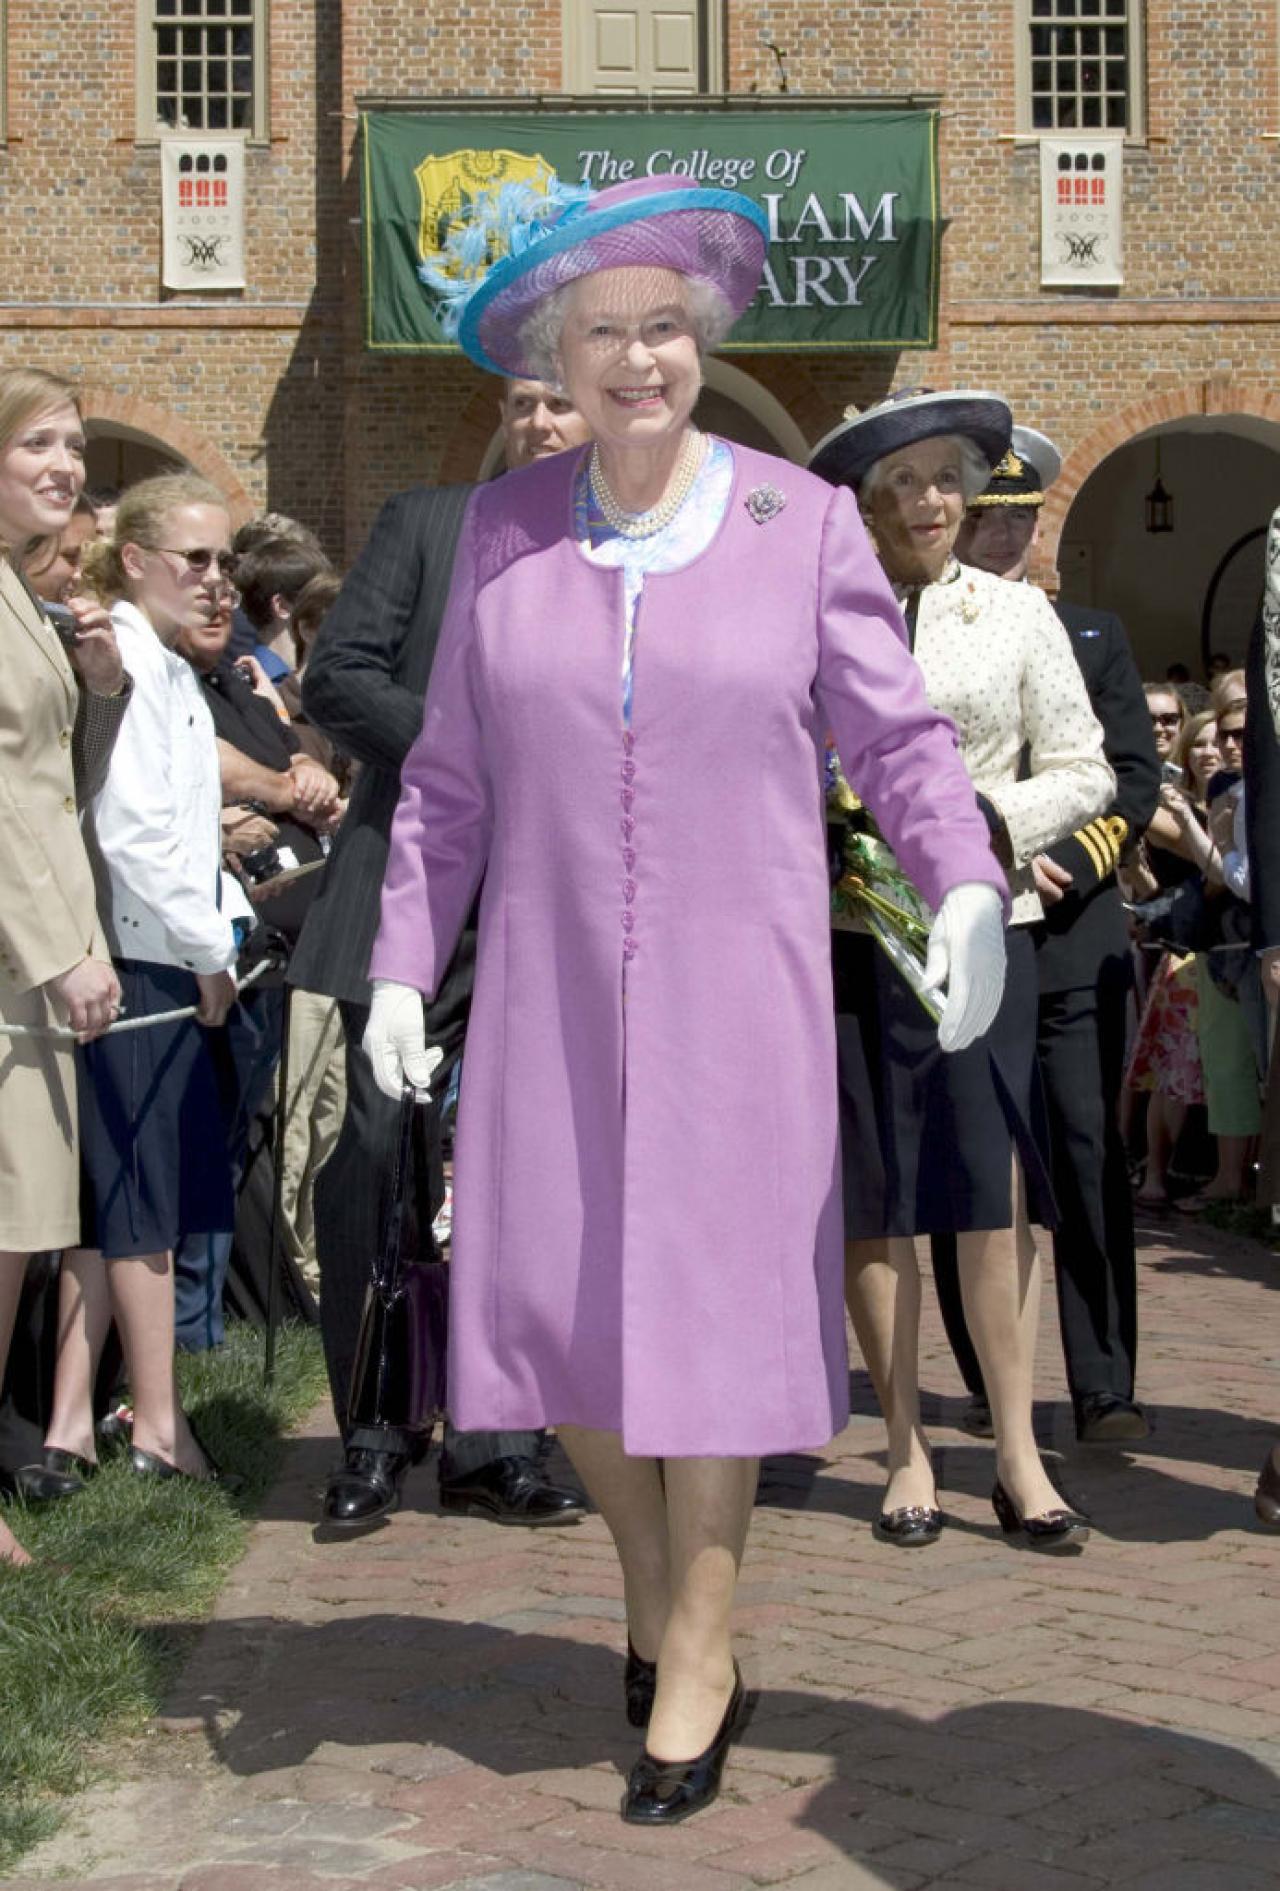 Queen Elizabeth II visits William and Mary College in Williamsburg, Virginia on May 4, 2007. This is the second day of a six day state visit of the United States to commemorate the 400 year anniversary of the Settlement of Jamestown. (Photo by Anwar Hussein/FilmMagic)